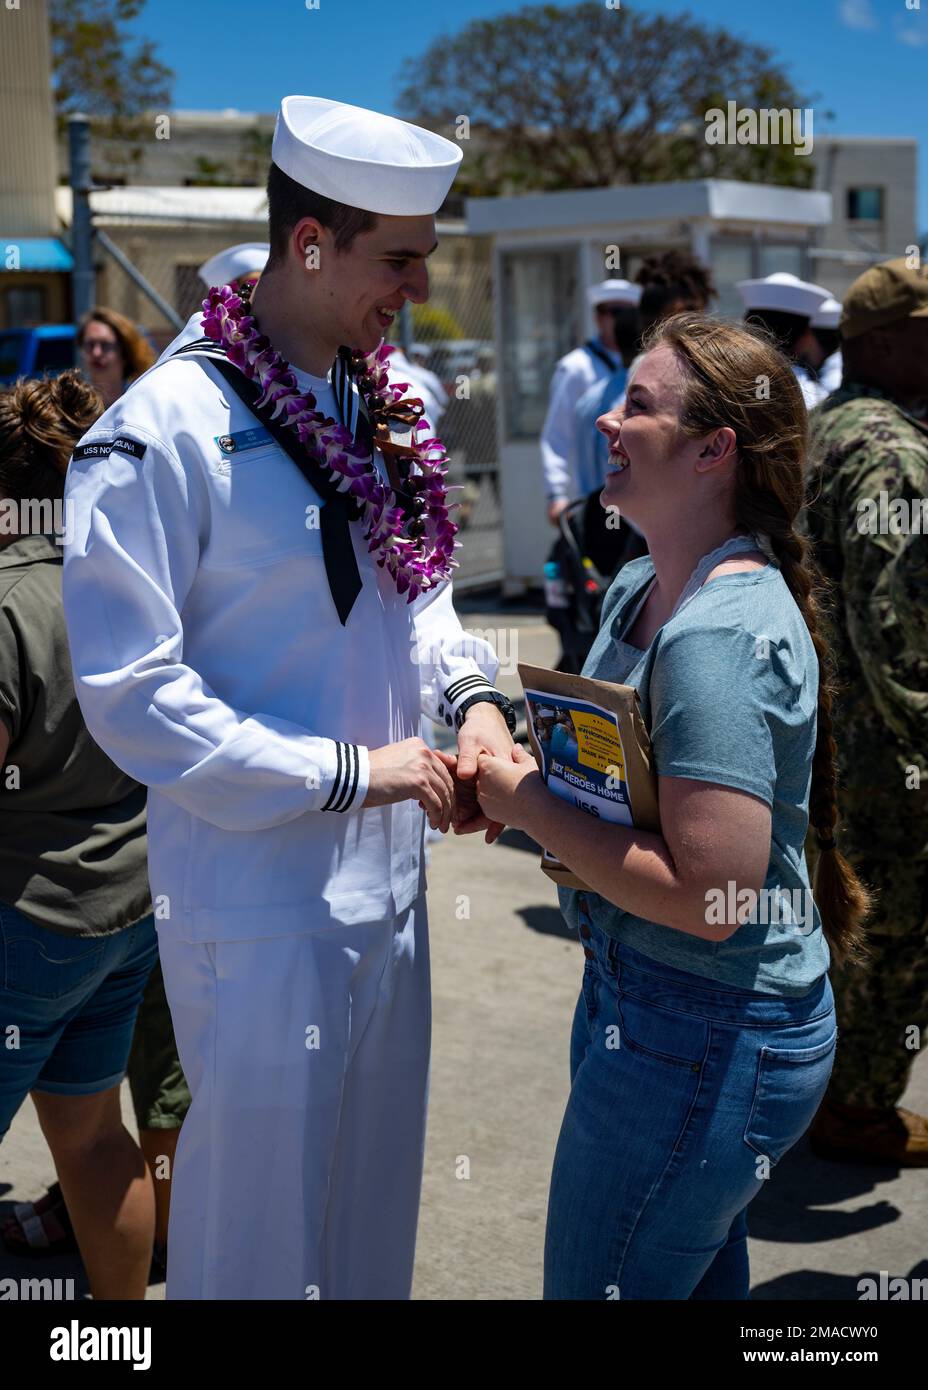 220525-N-LN285-2355 JOINT BASE PEARL HARBOR-HICKAM (May 25, 2022) --  Electronics Technician (Nuclear) 3rd Class Matthew Webb, from Peoria, Ill., assigned to the Virginia-class fast-attack submarine USS North Carolina (SSN 777) reunites with his family after the boat returns to Joint Base Pearl Harbor-Hickam from deployment in the 7th Fleet area of responsibility. North Carolina performed a full spectrum of operations, including anti-submarine and anti-surface warfare, during the extended seven-month, Indo-Pacific deployment. Stock Photo